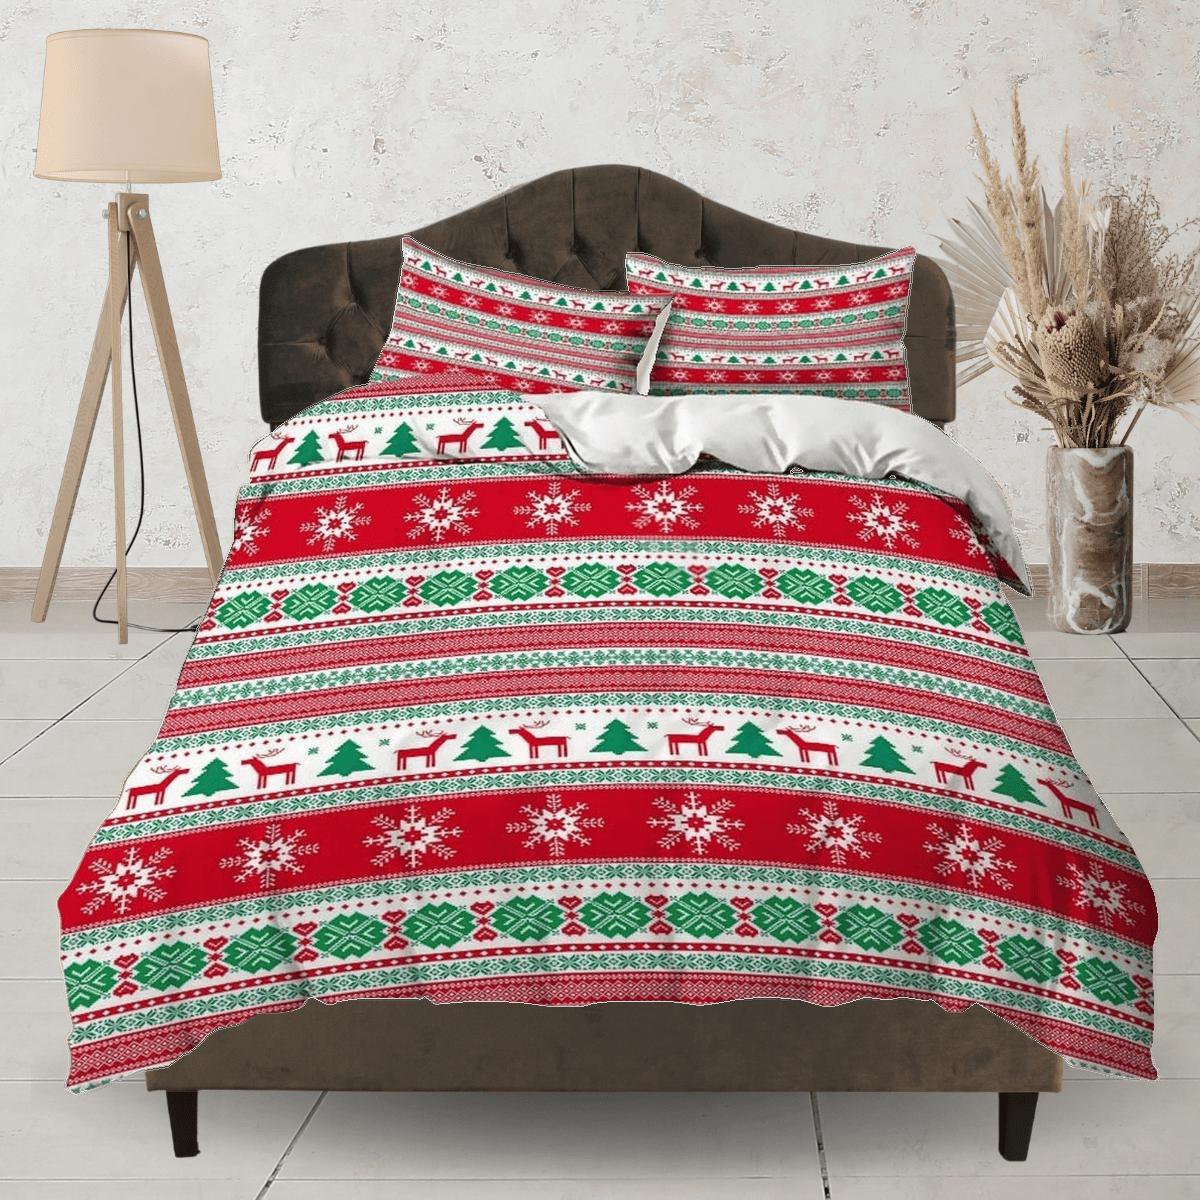 daintyduvet 1950s ugly Christmas sweater inspired bedding & pillowcase holiday gift duvet cover king queen toddler bedding baby Christmas farmhouse